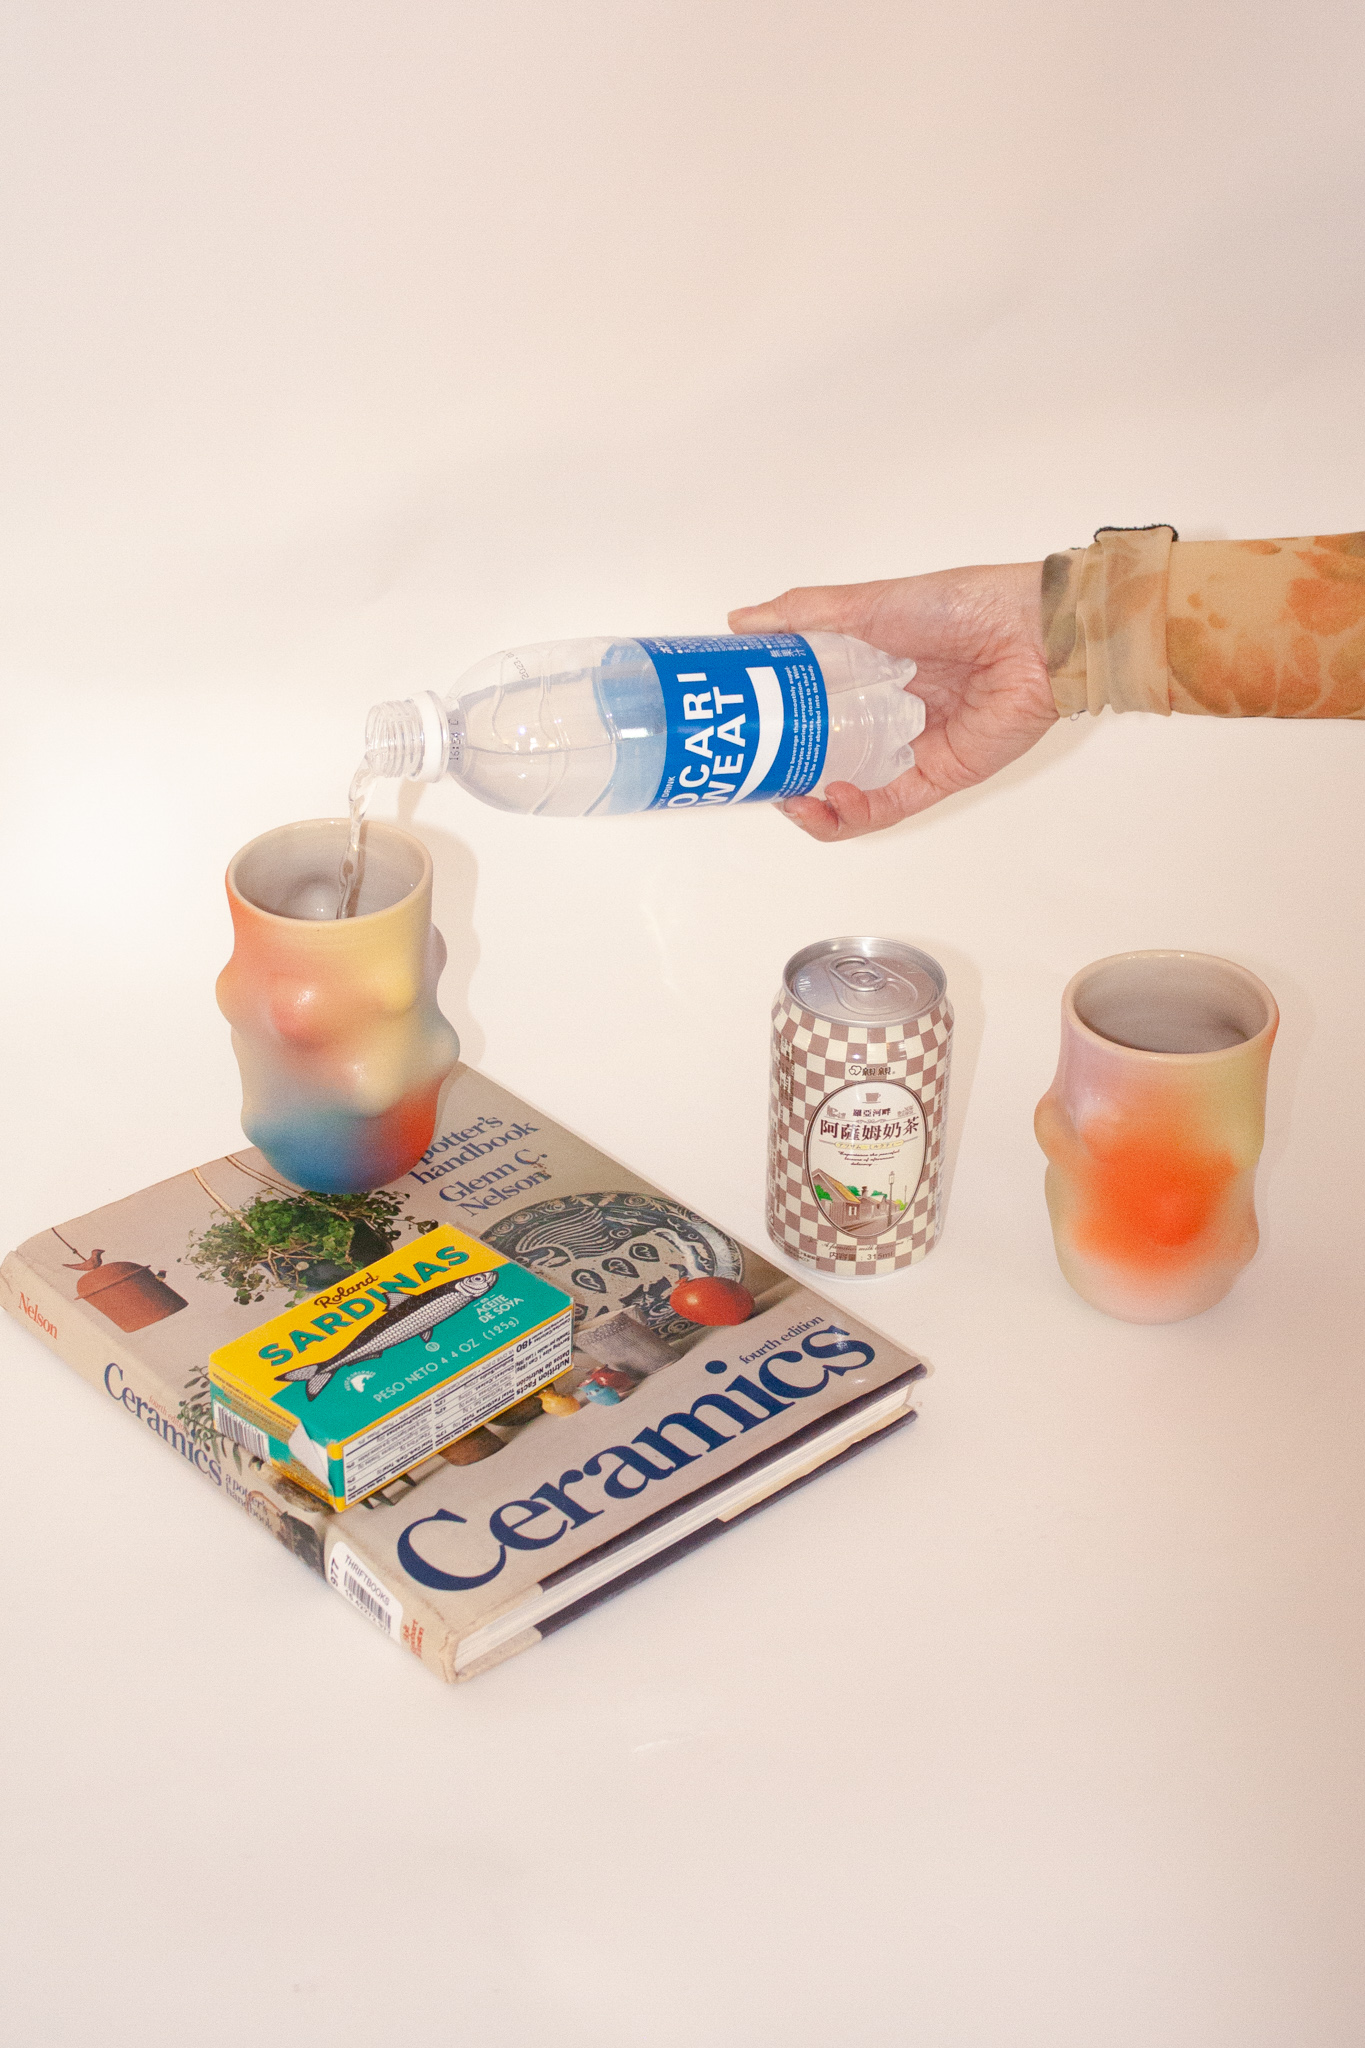 Objects photographed on a light pinkish, beige background. In view is a book about ceramics, and on top of the book is a lumpy, colorful mug. There’s a disembodied hand pouring water into the mug. Next to the book is a can and another lumpy, colorful mug.